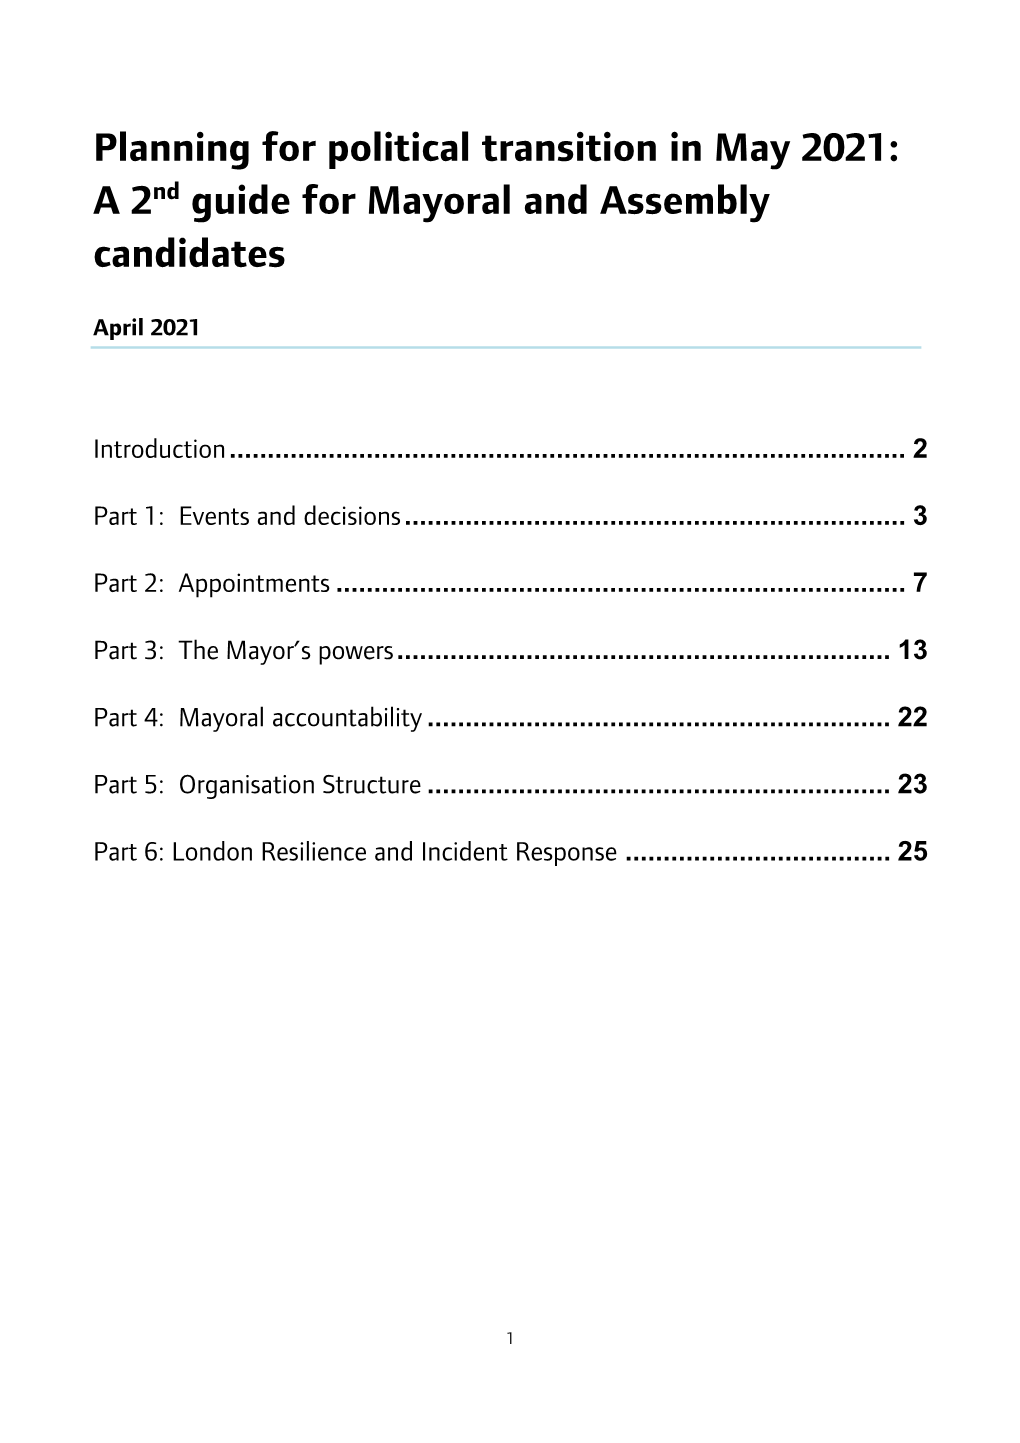 Planning for Political Transition in May 2021: a 2Nd Guide for Mayoral and Assembly Candidates